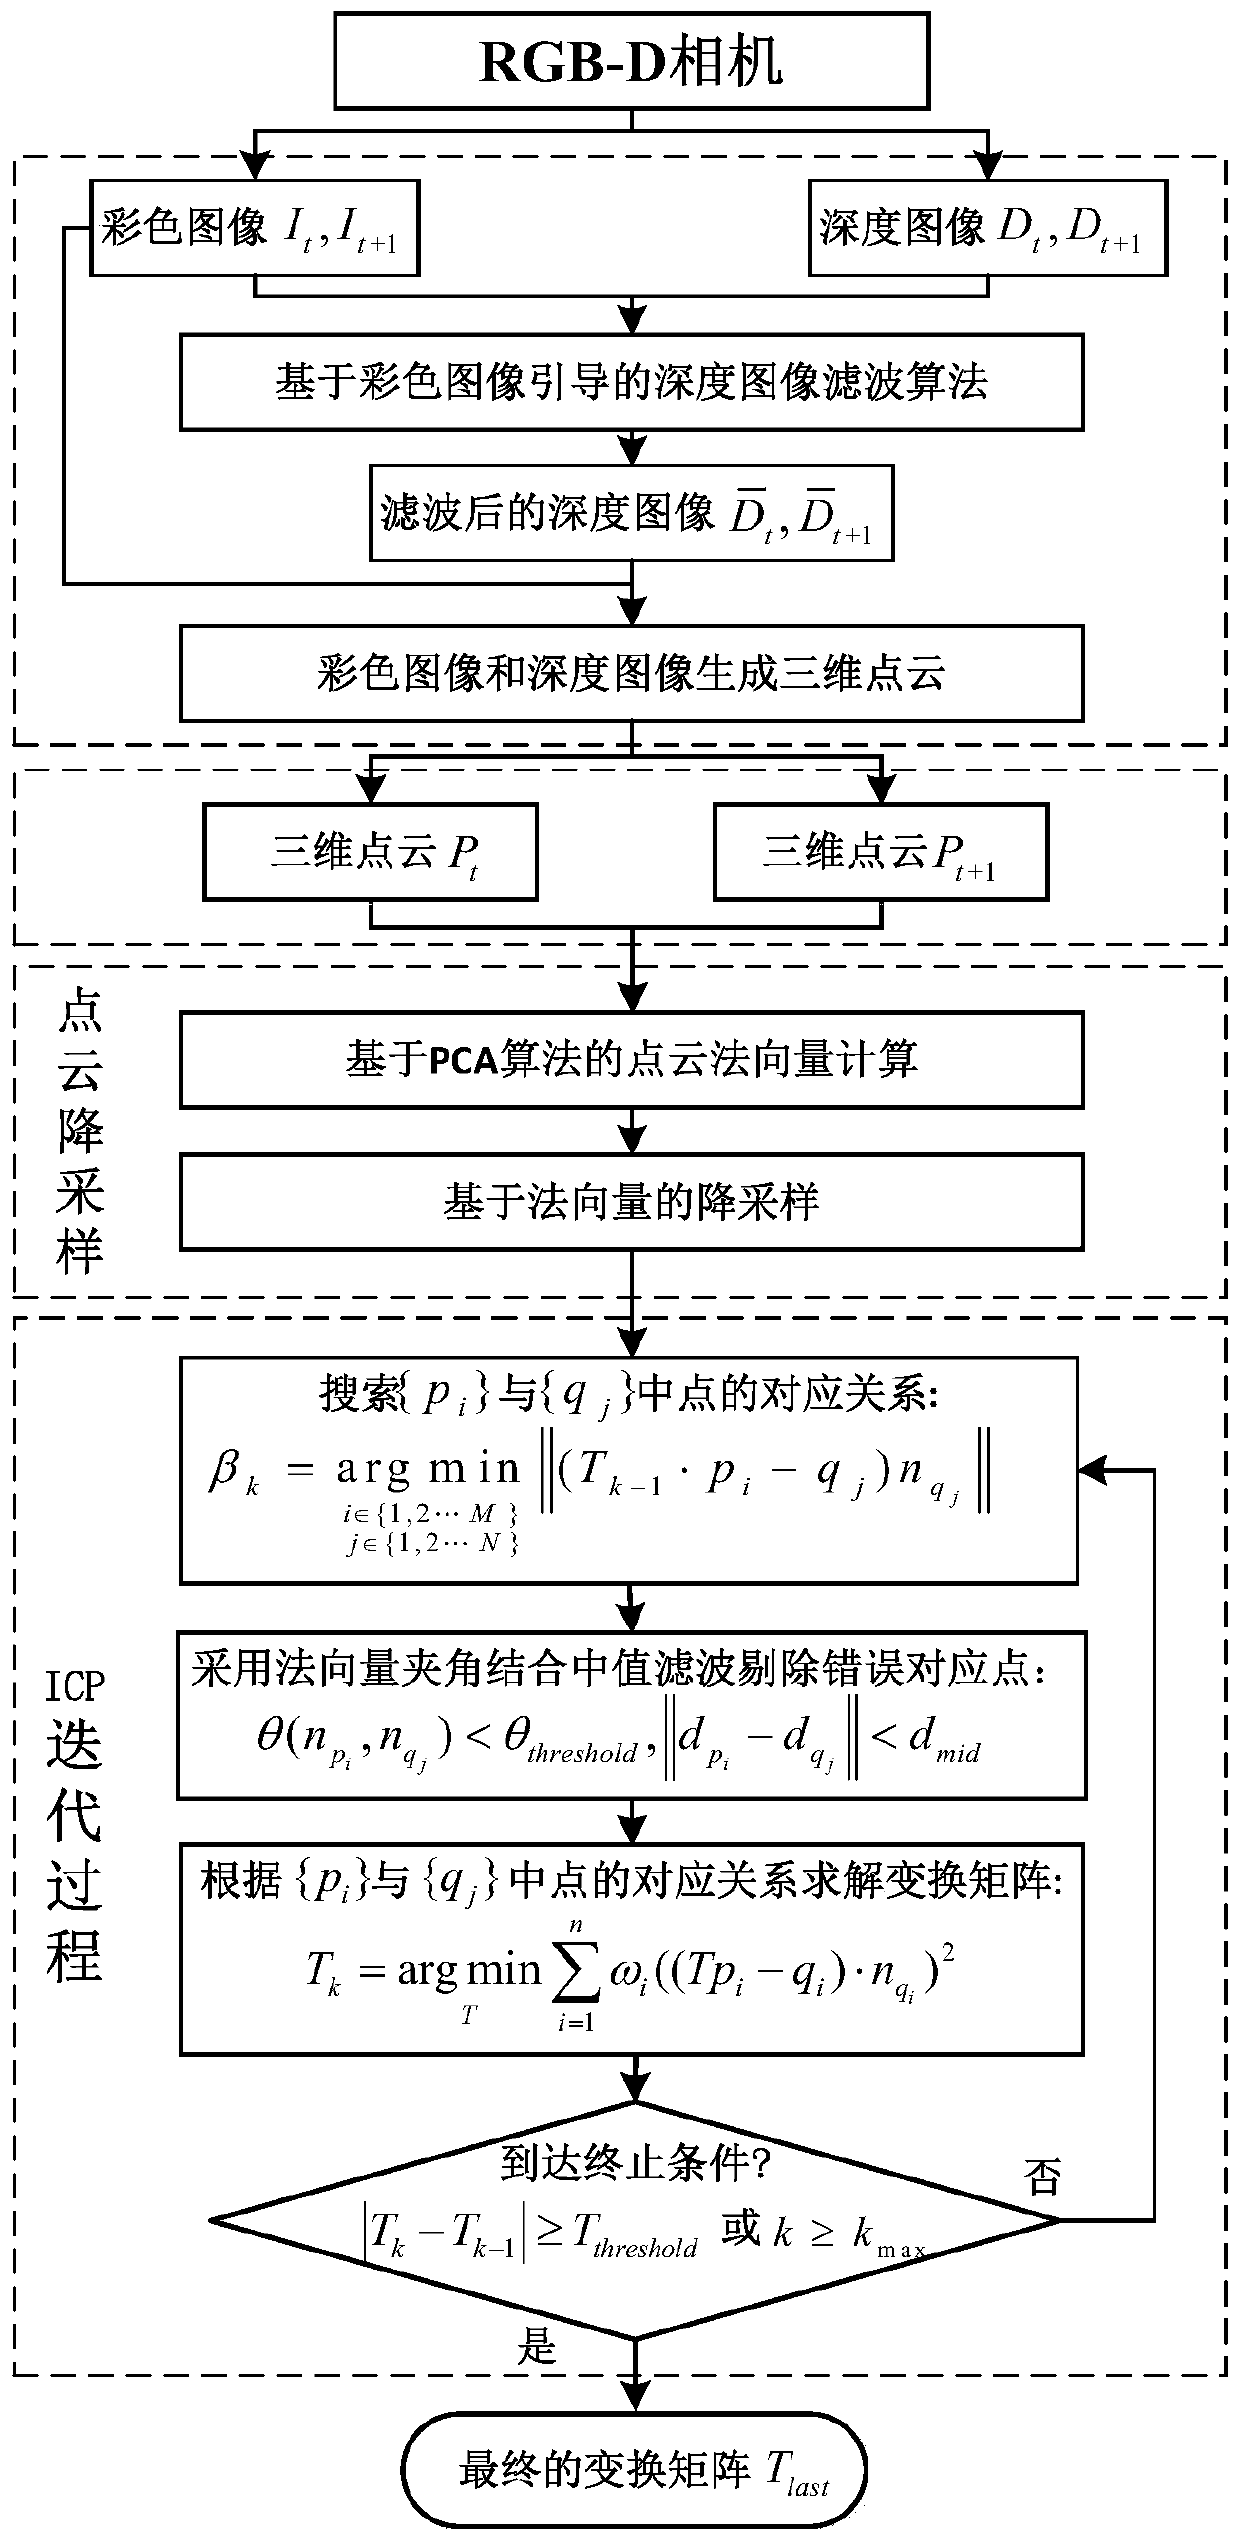 Improved three-dimensional point cloud registration method and system based on two-dimensional image guidance, and readable storage medium